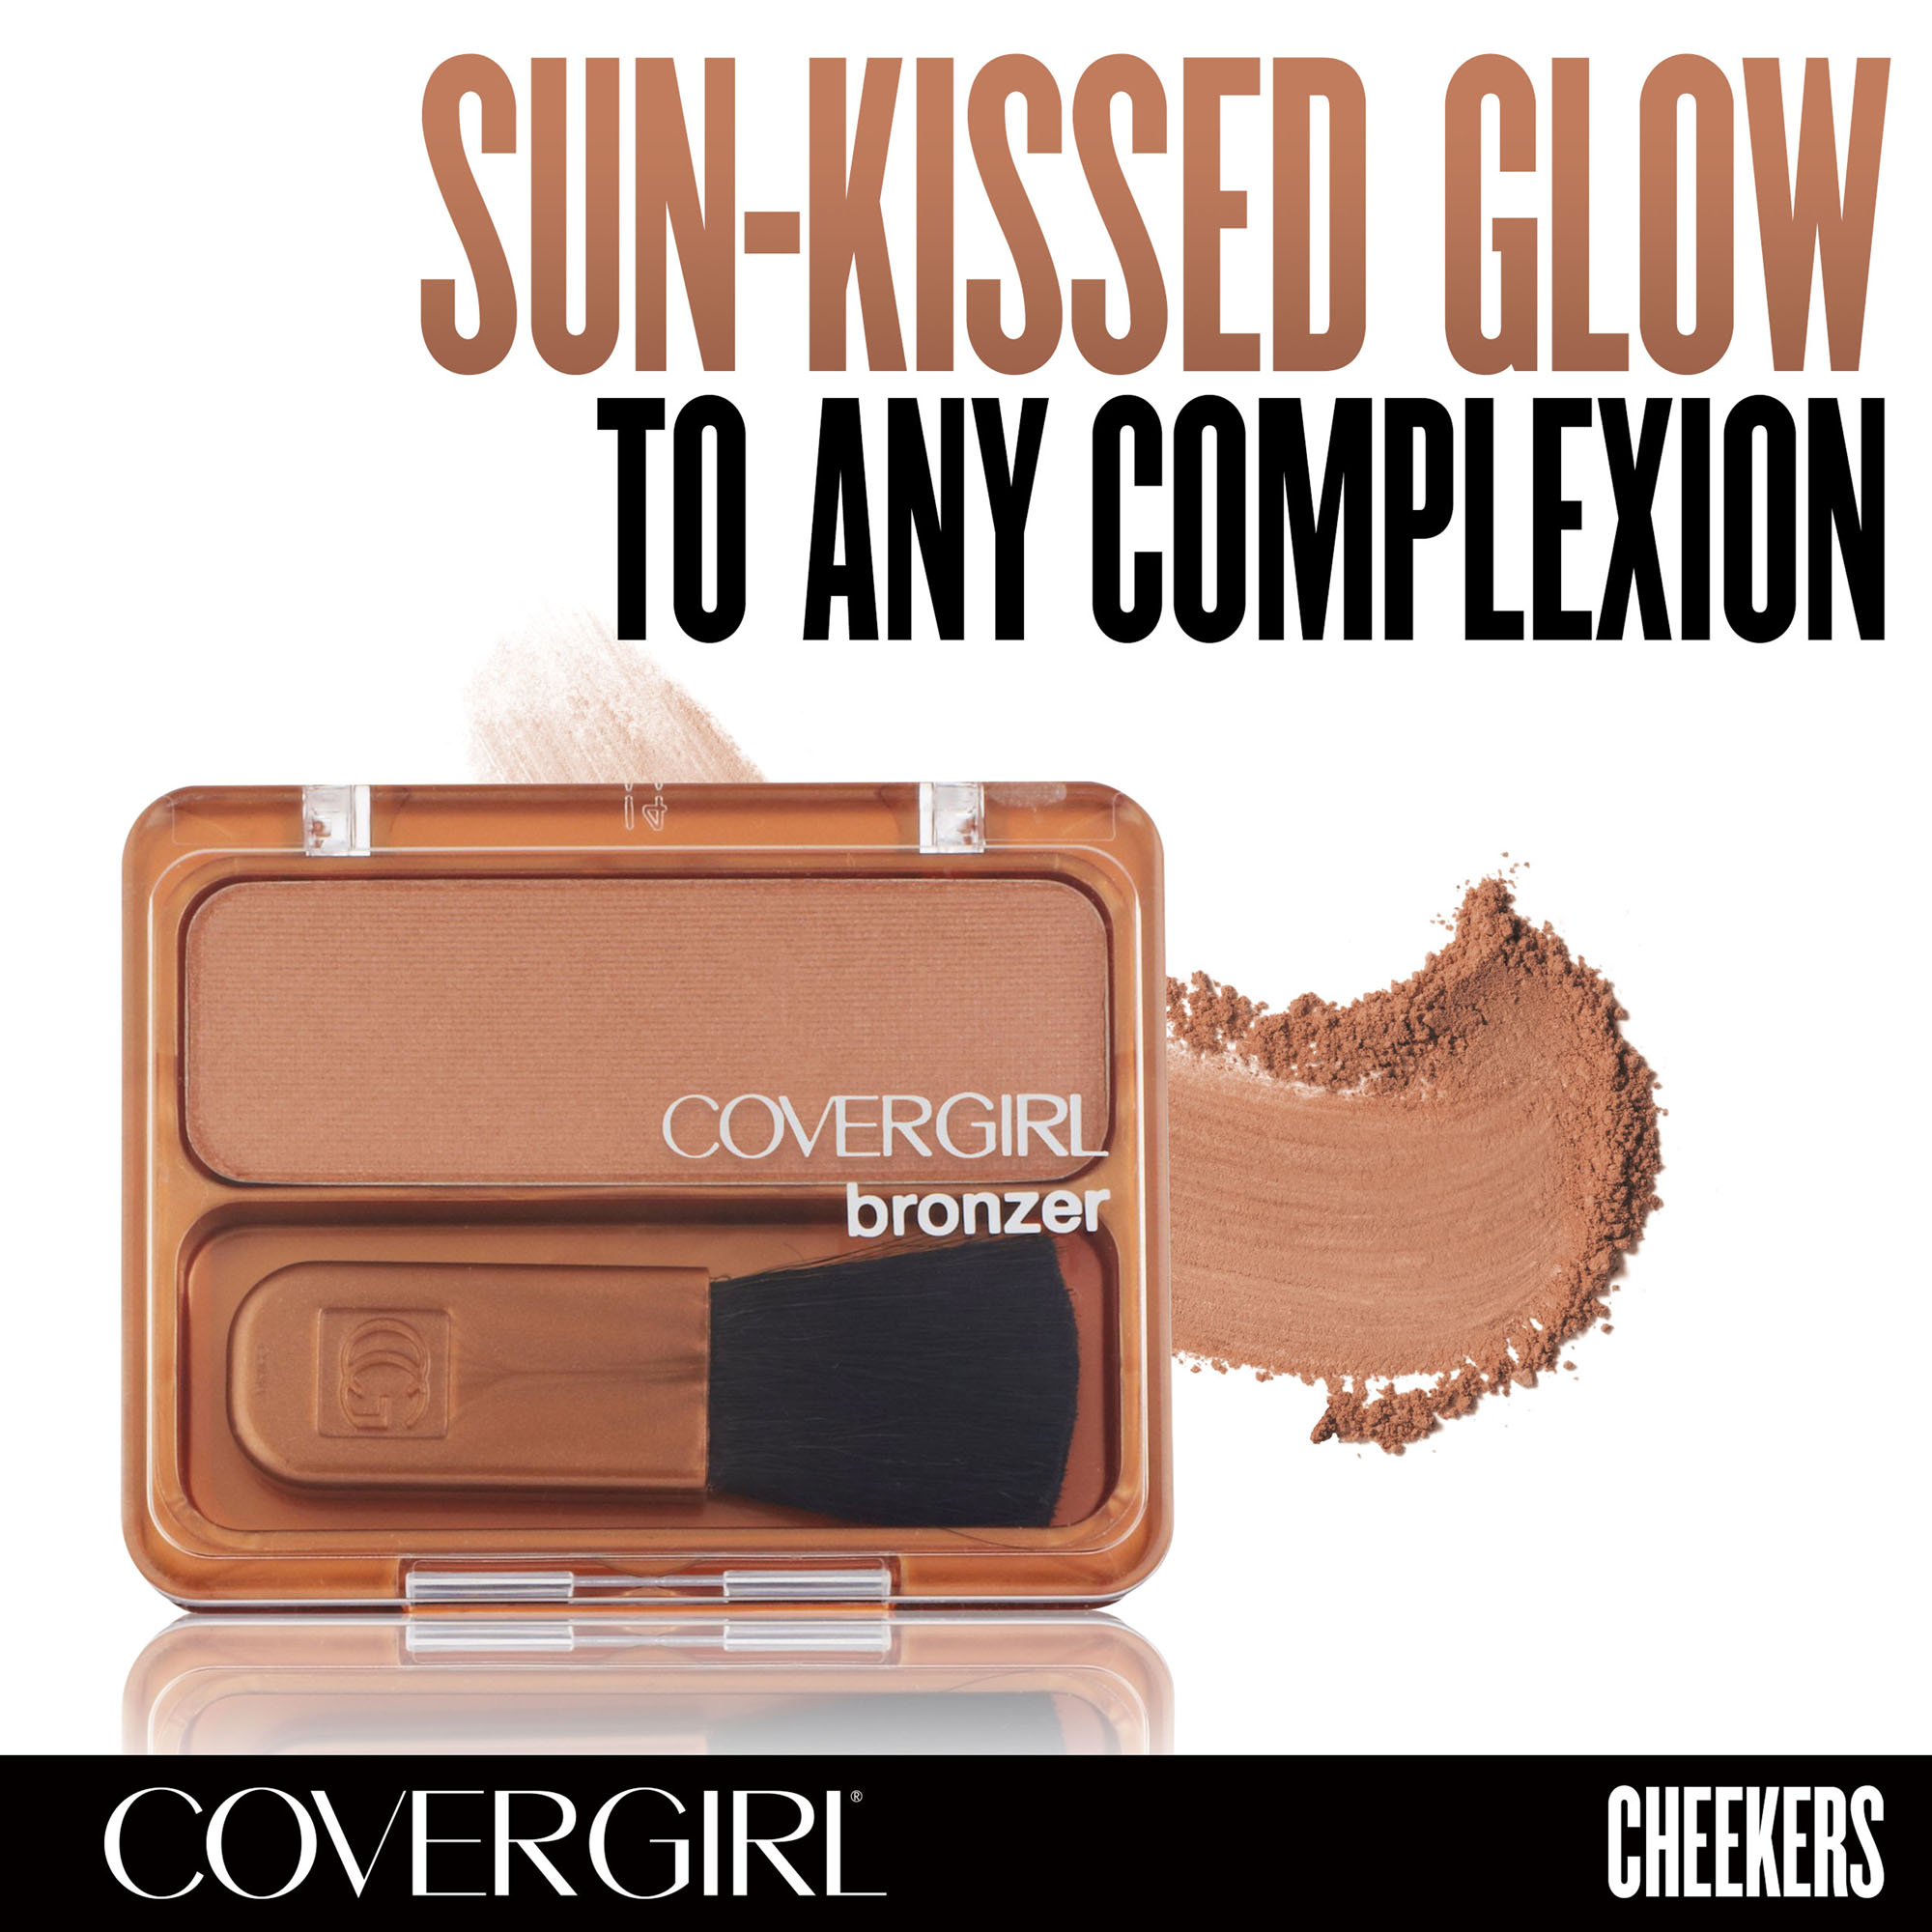 COVERGIRL Cheekers Blendable Powder Bronzer, 102 Copper Radiance - image 3 of 5